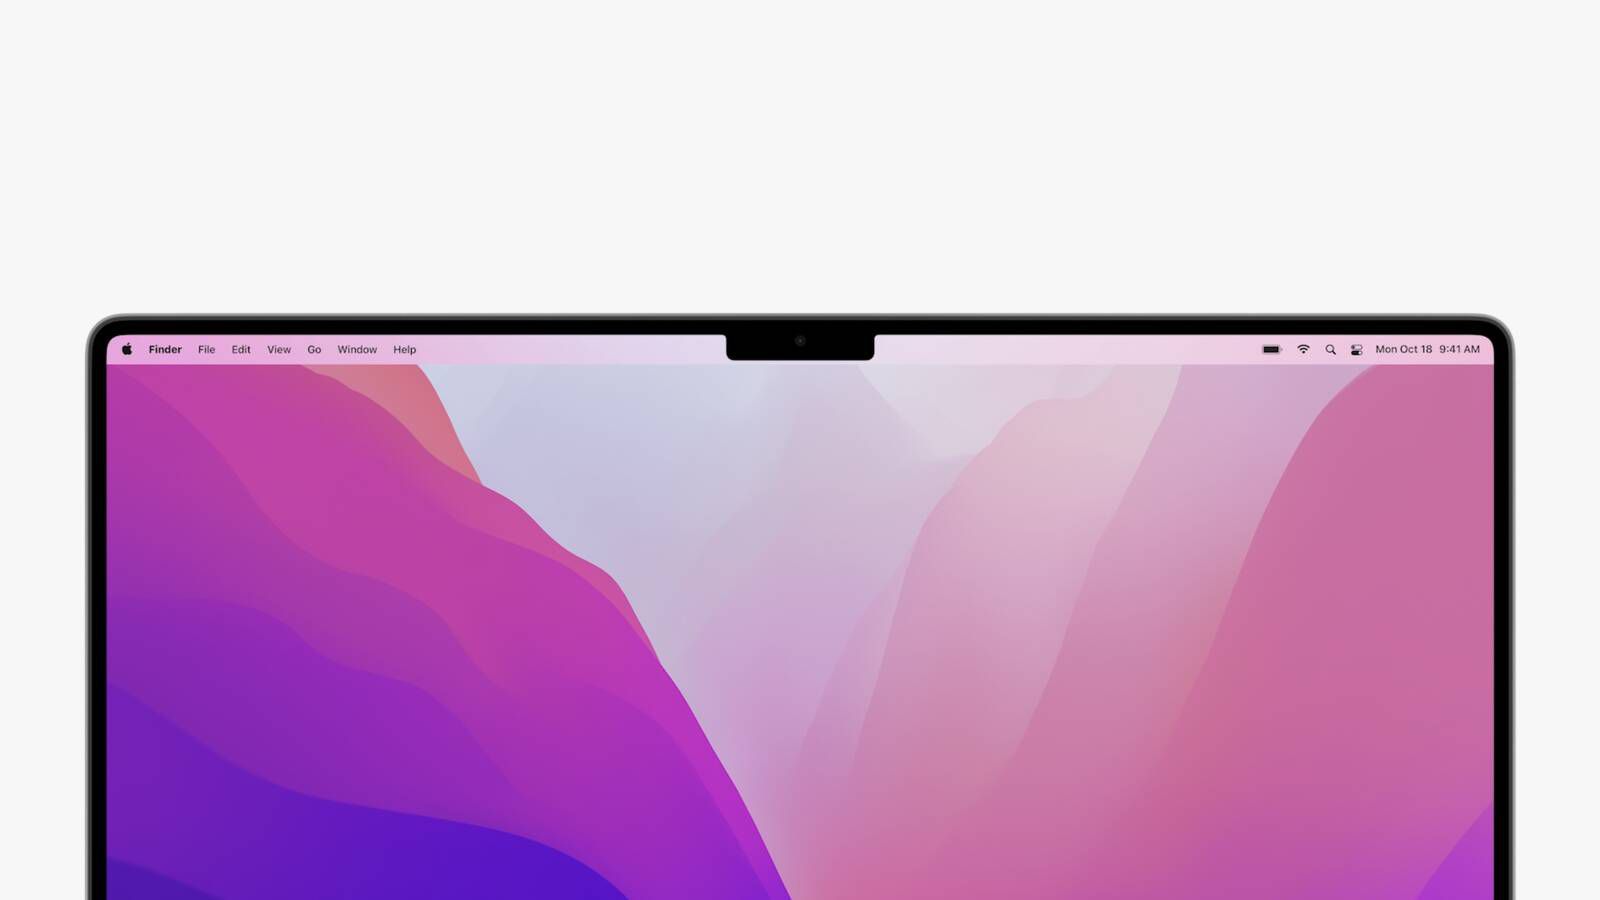 New macOS 'Compatibility Mode' Lets Fullscreen Apps Use Area Around Notch